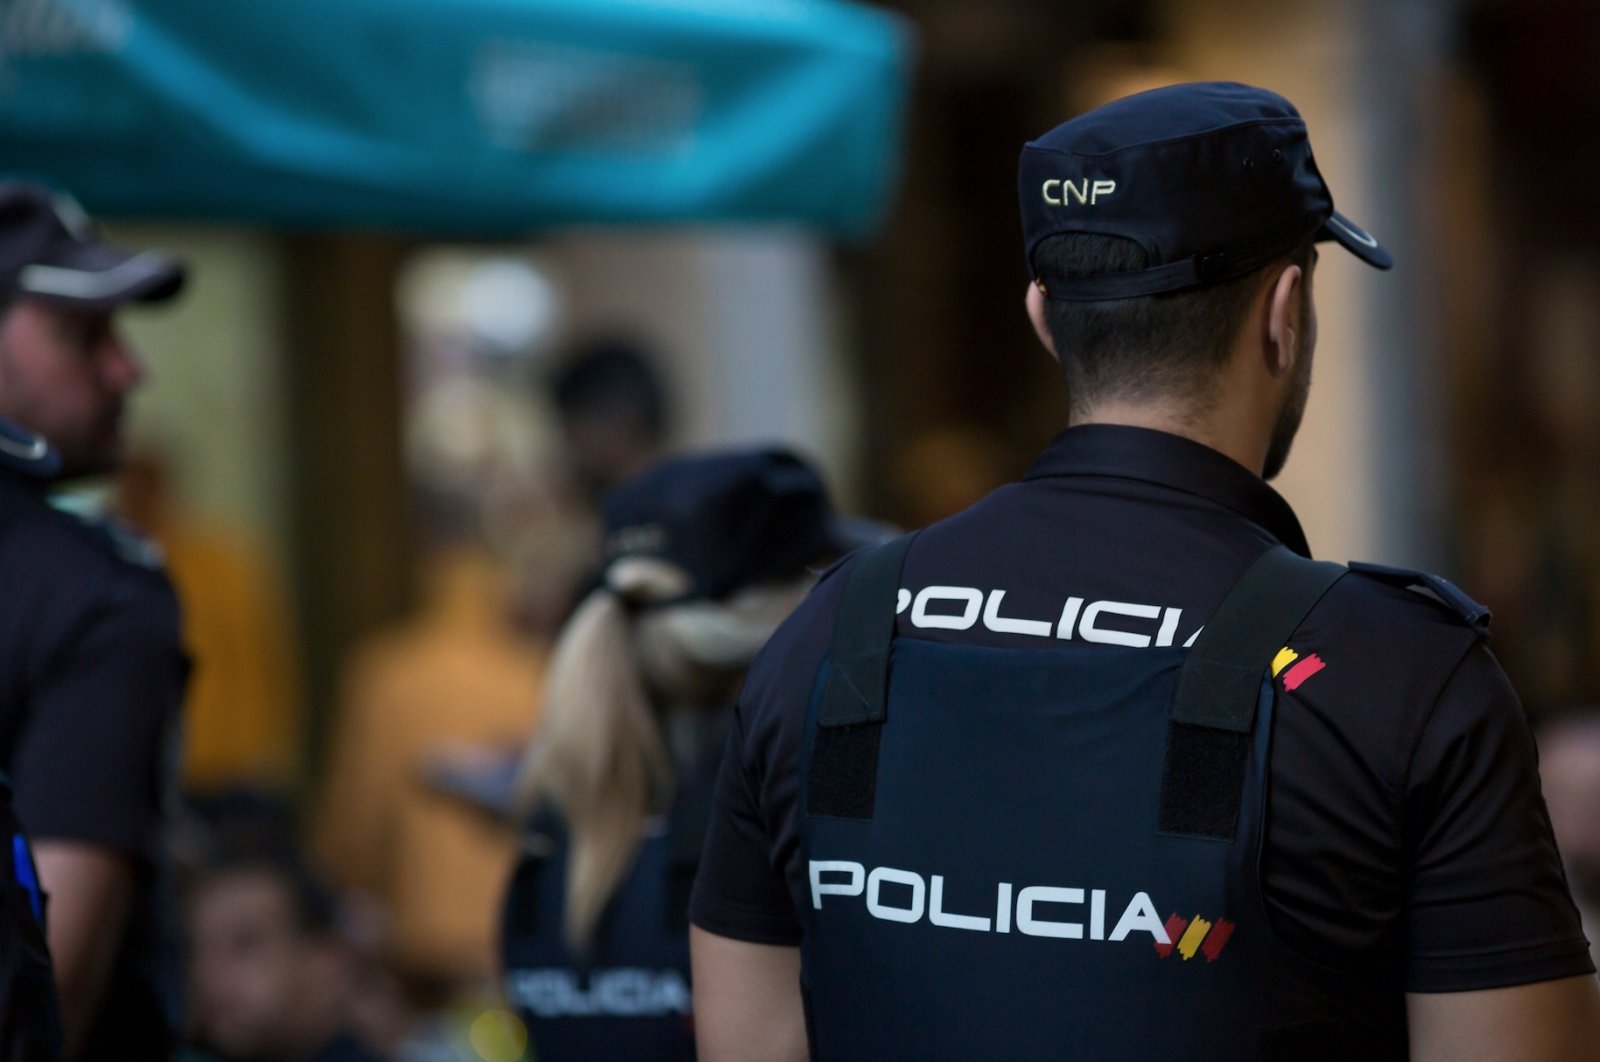 Several agents of the Spanish national police are seen standing guard in a protest against animal abuse in Alcala de Henares, Spain, Oct. 2019. (Shutterstock Photo)